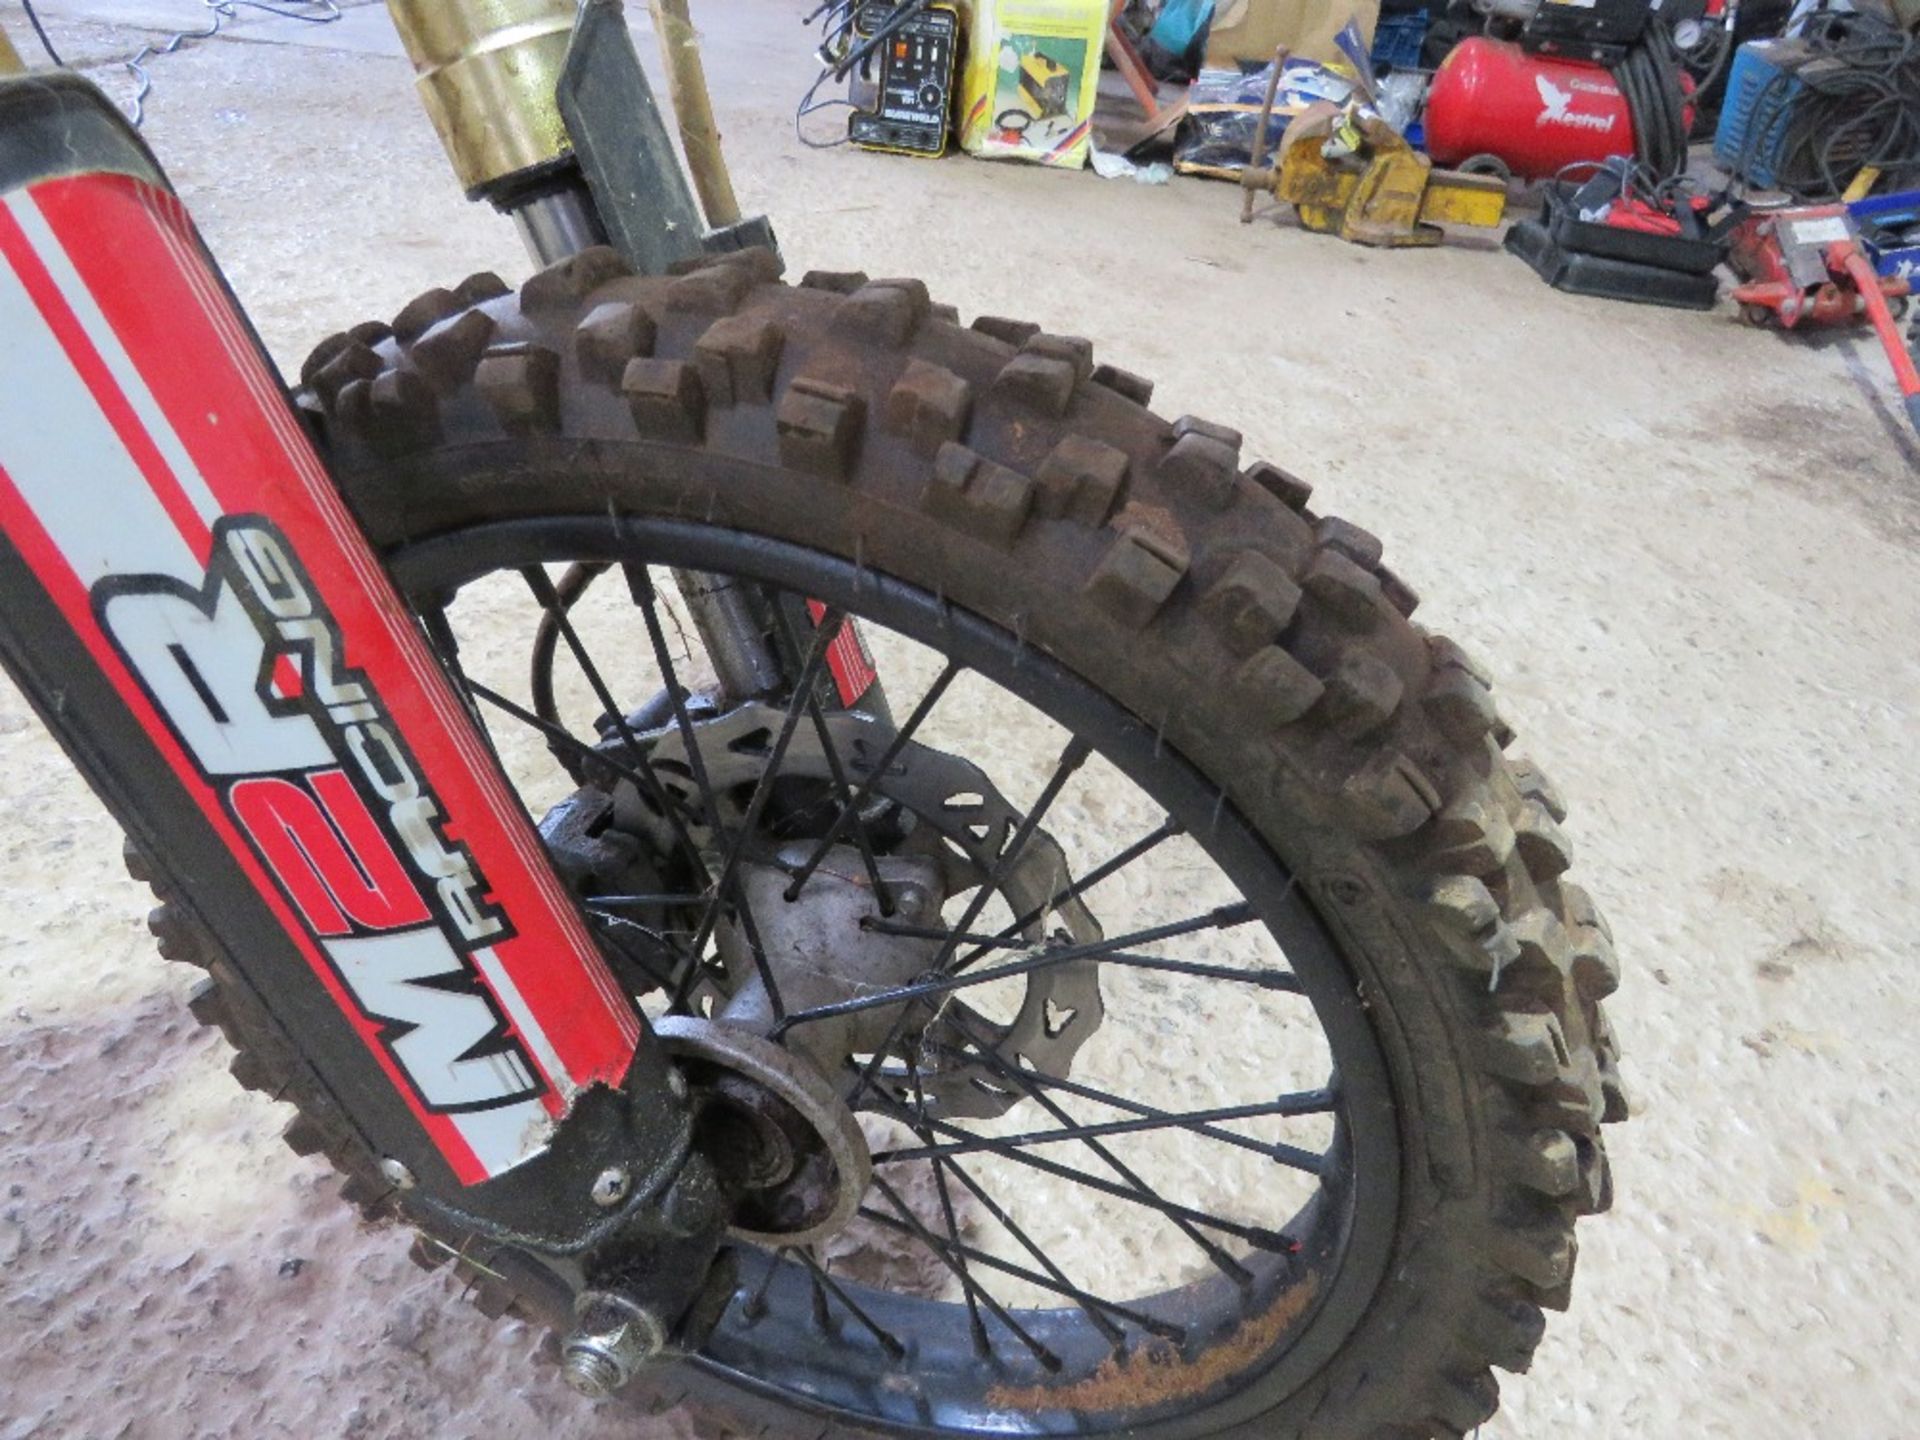 KXF125 CHILD'S SIZE MOTOCROSS TRIAL MOTORBIKE. BEEN IN STORAGE AND UNUSED FOR OVER 5 YEARS. THIS - Image 9 of 10